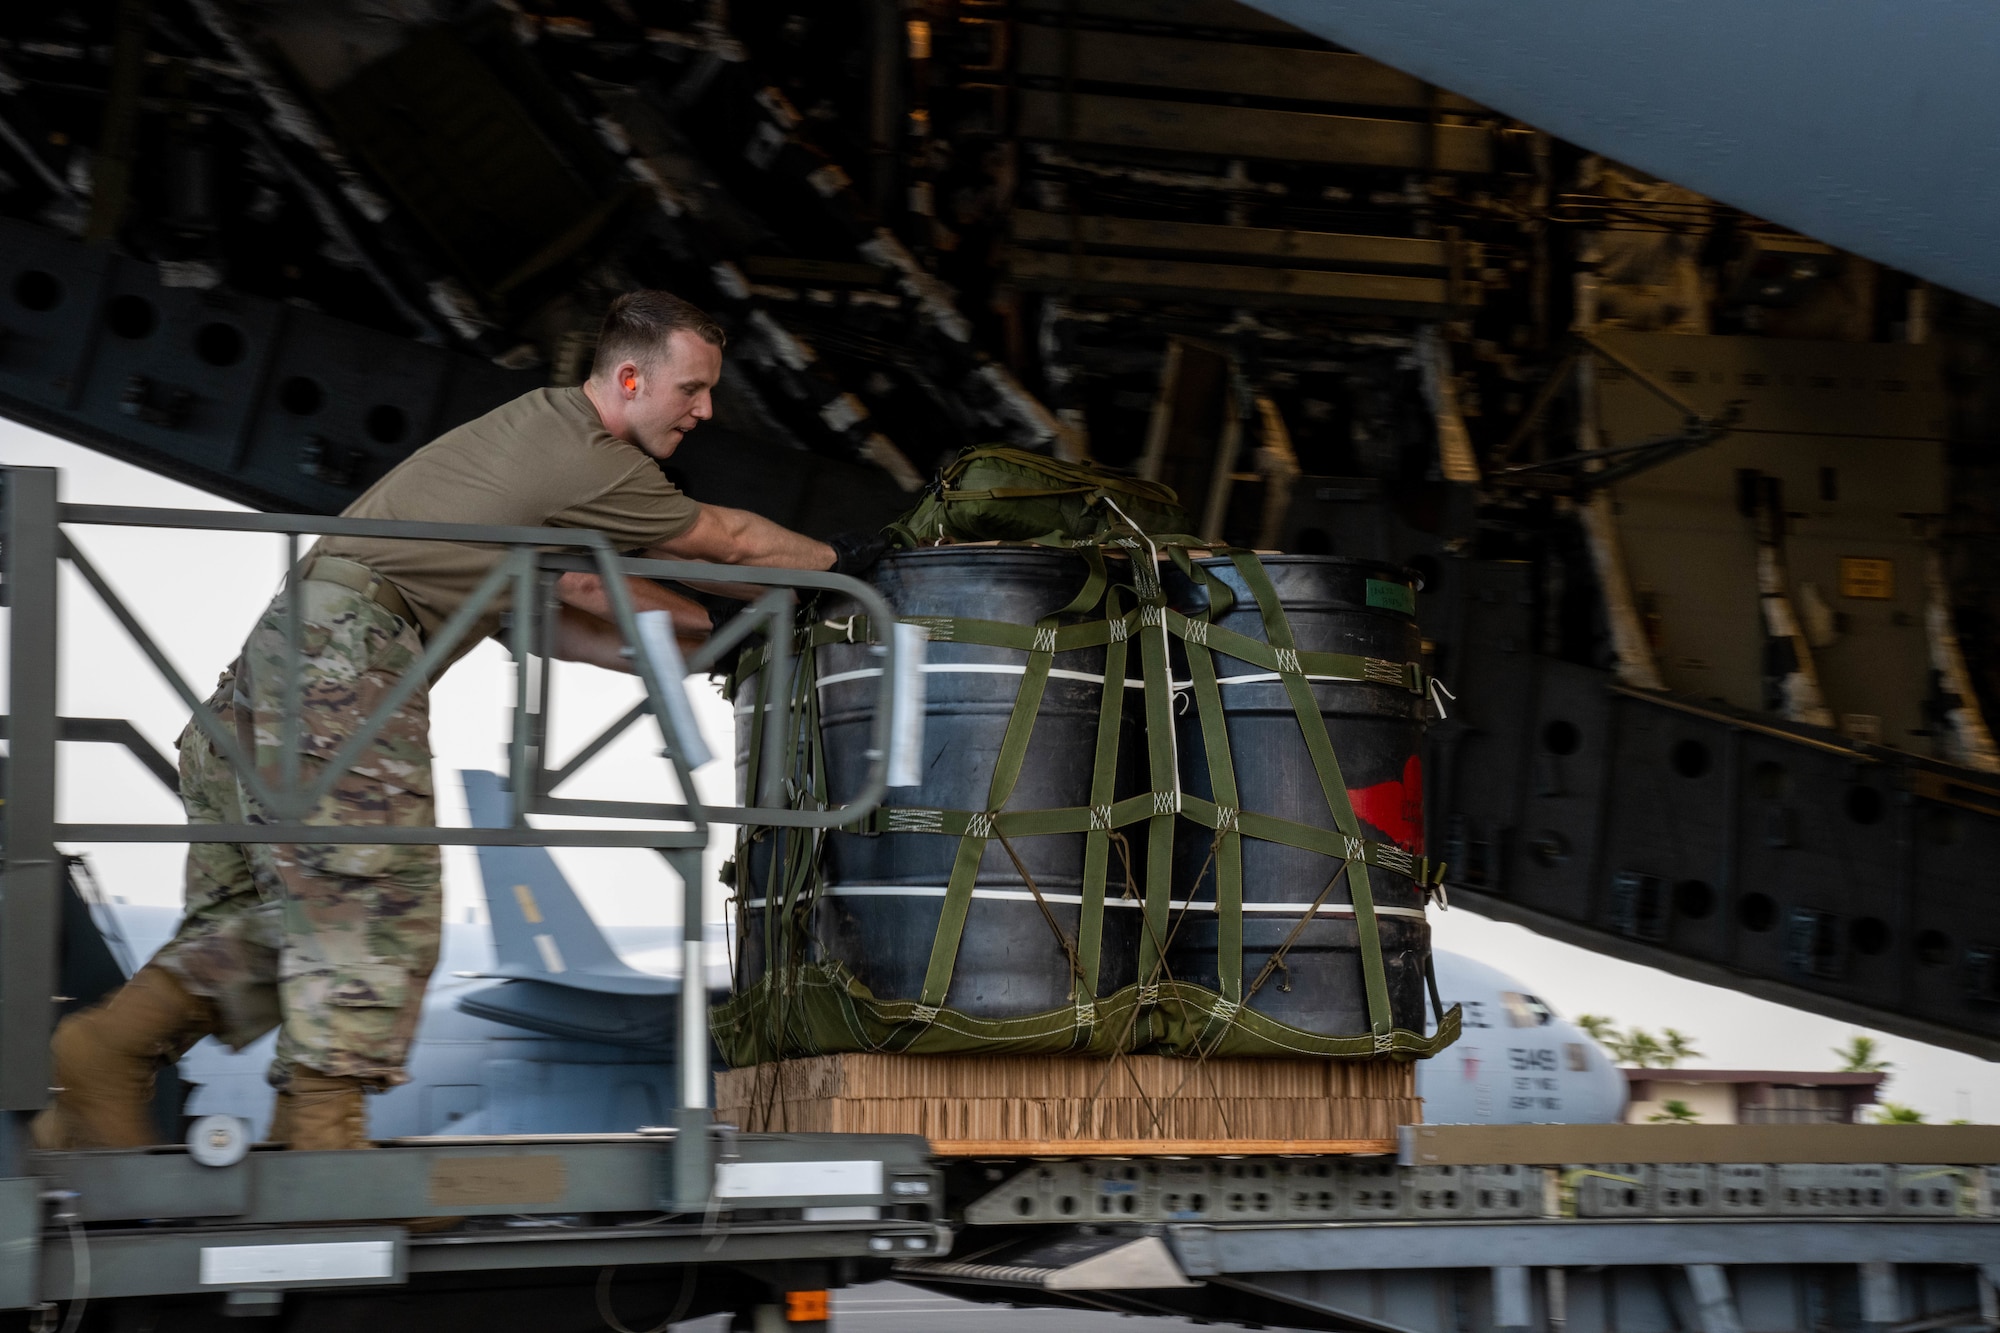 Staff Sgt. Waite Rowland, 647th Logistics Readiness Squadron combat mobility flight supervisor, loads cargo onto a C-17 Globemaster III in support of an exercise at Joint Base Pearl Harbor-Hickam, Hawaii, Aug. 24, 2022. The 647th LRS is responsible for ensuring passengers and cargo are loaded onto the aircraft safely and efficiently in support of 15th Wing airlift operations. (U.S. Air Force photo by Senior Airman Makensie Cooper)